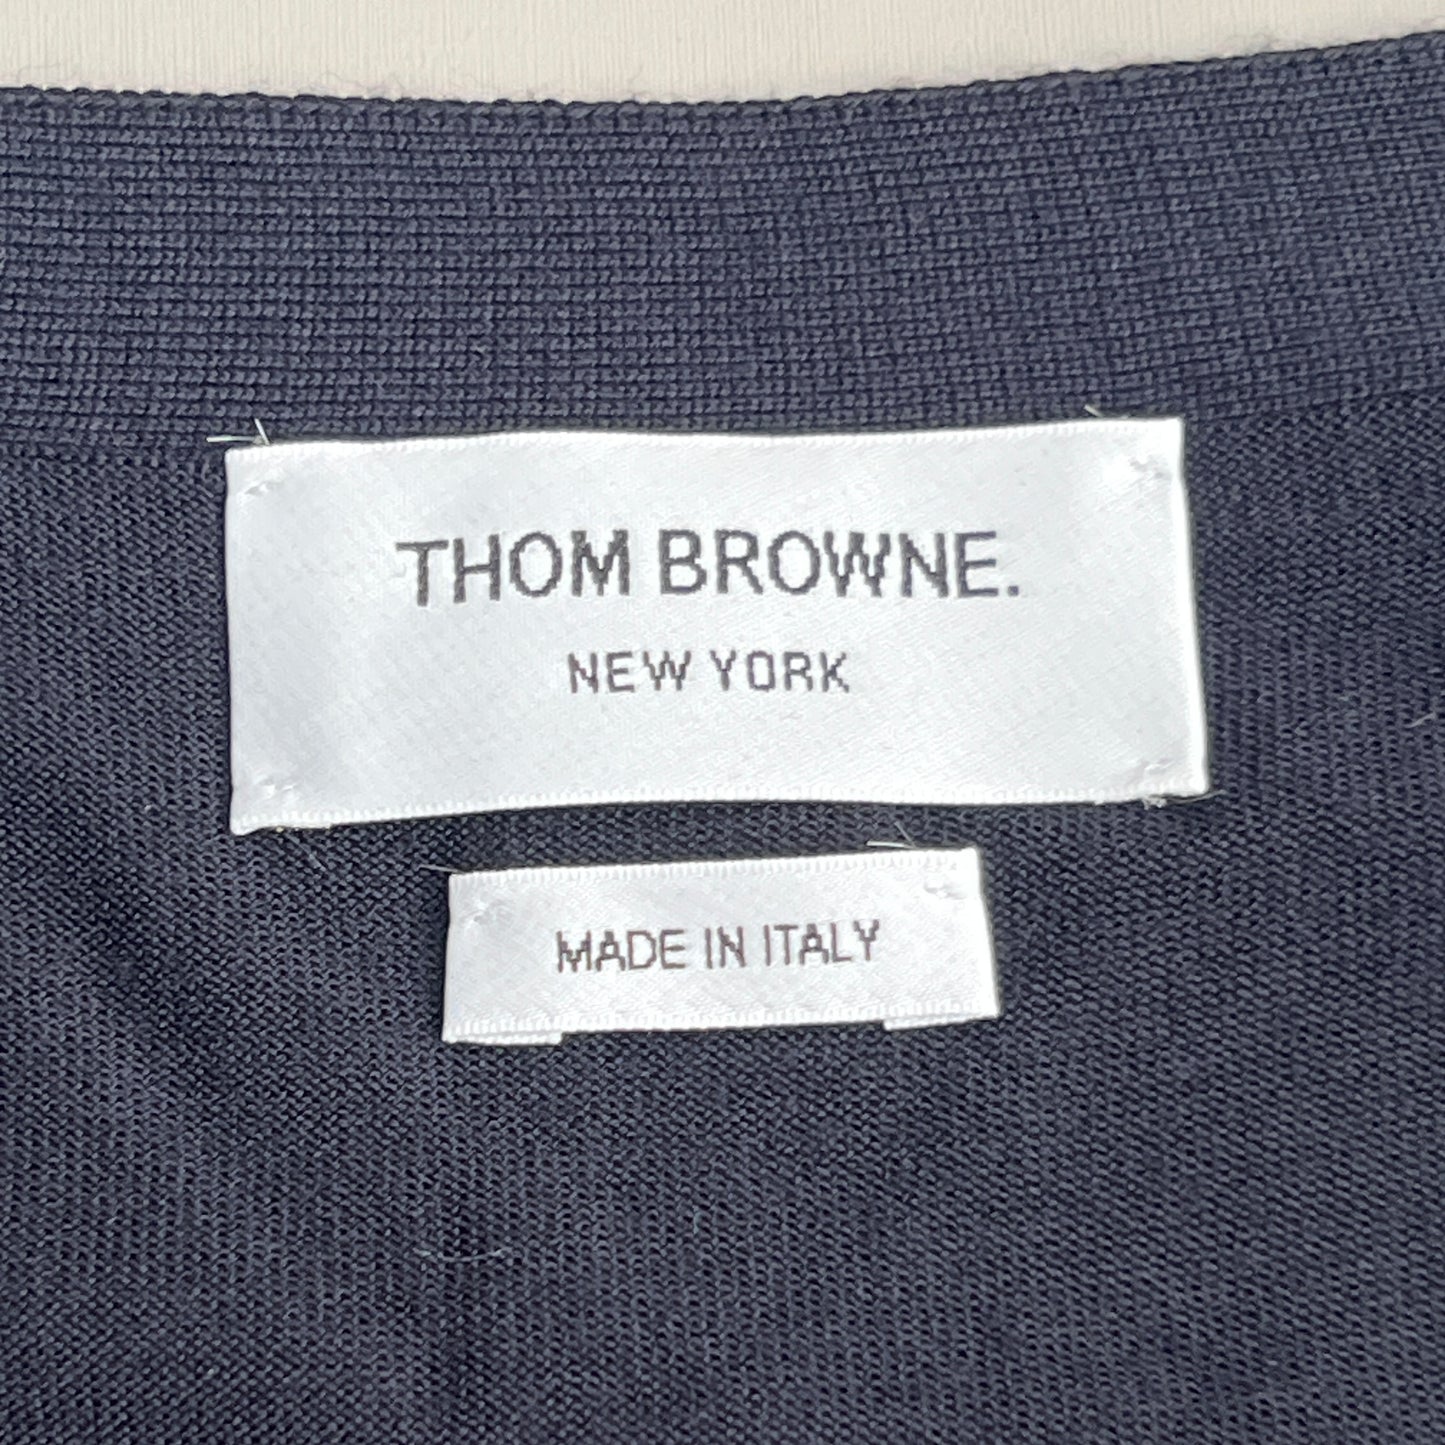 THOM BROWNE V-NECK Cardigan w/ 4Bar Sleeve in Sustainable Fine Wool Size 0 (New)